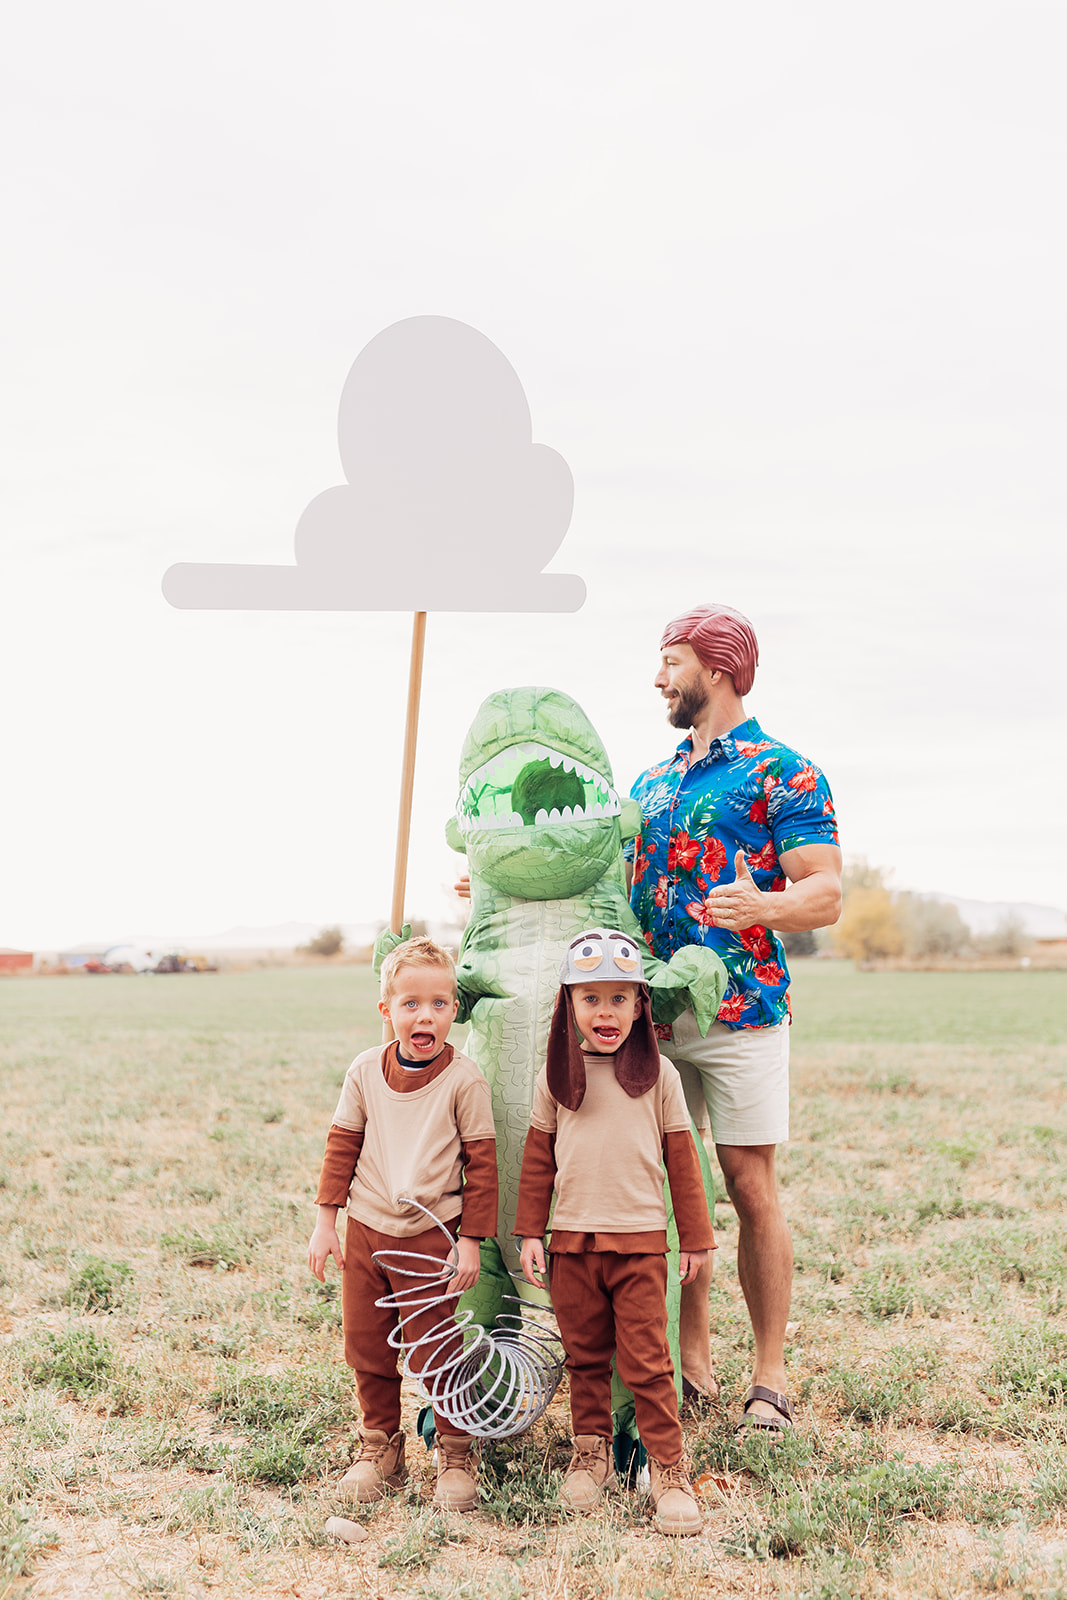 Toy Story Family Halloween Costumes - Twist Me Pretty